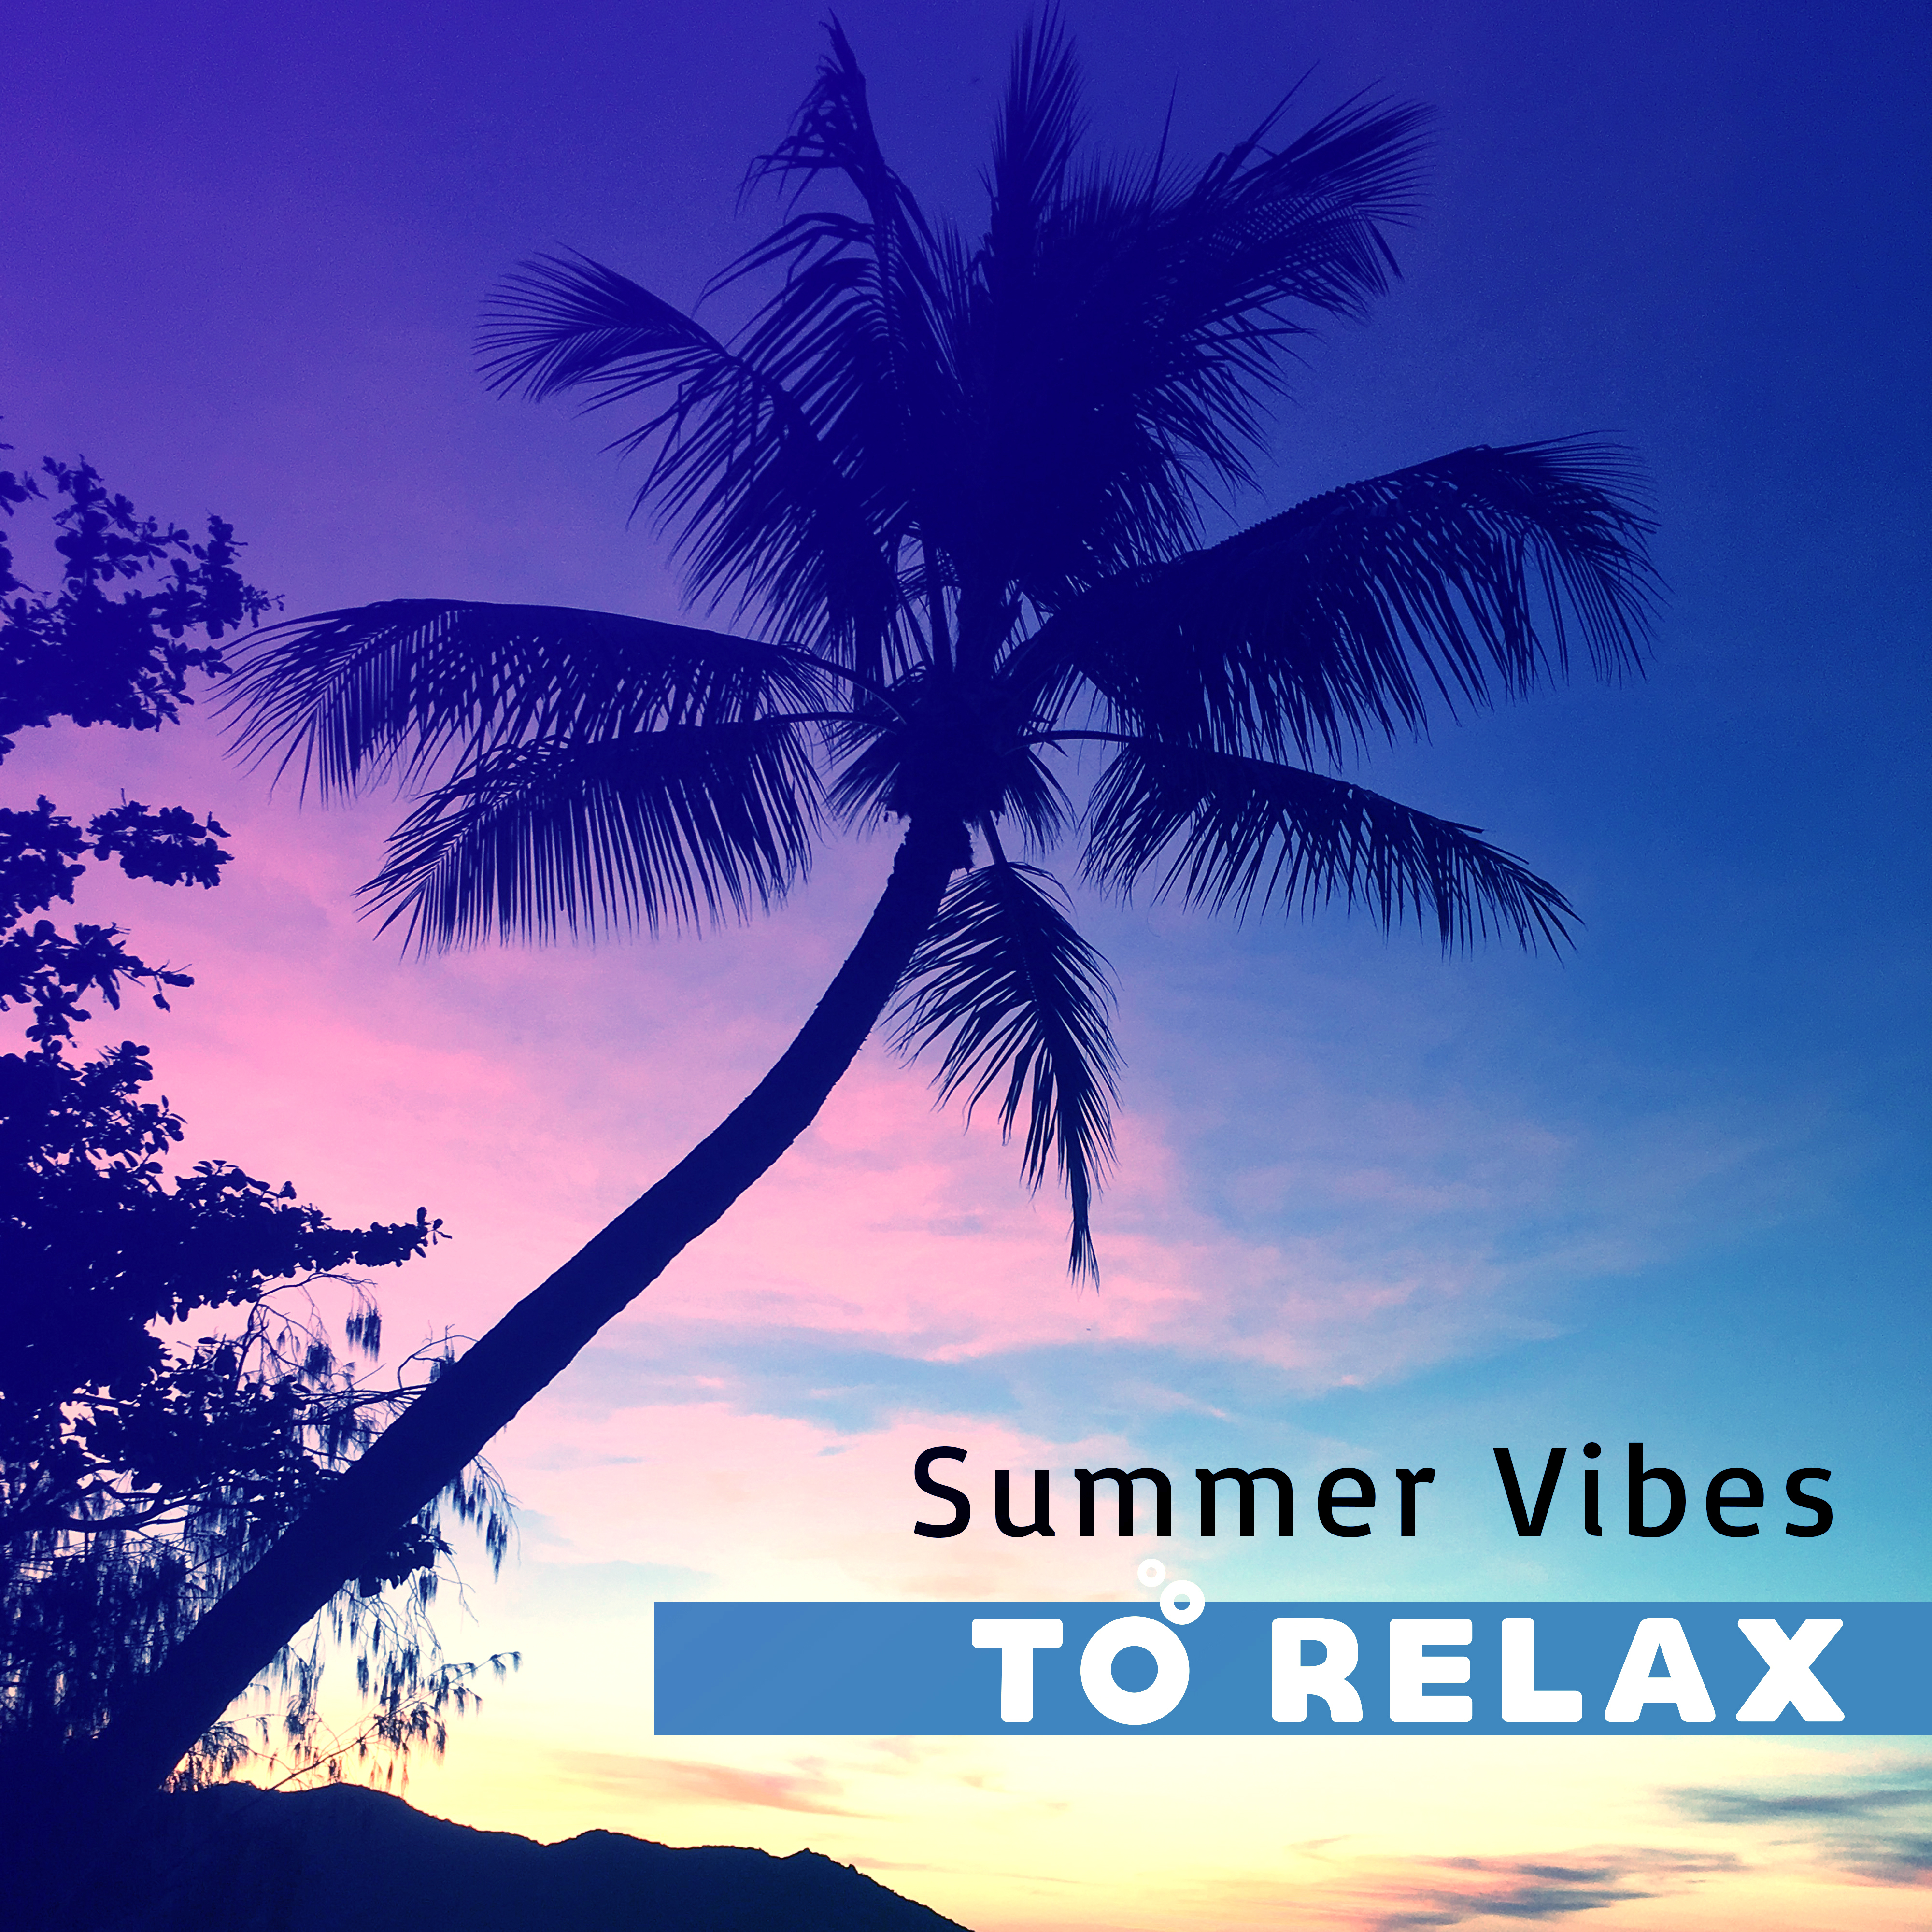 Summer Vibes to Relax – Calm Music to Rest, Stress Relief, Beach Lounge Music, Ibiza Relaxation